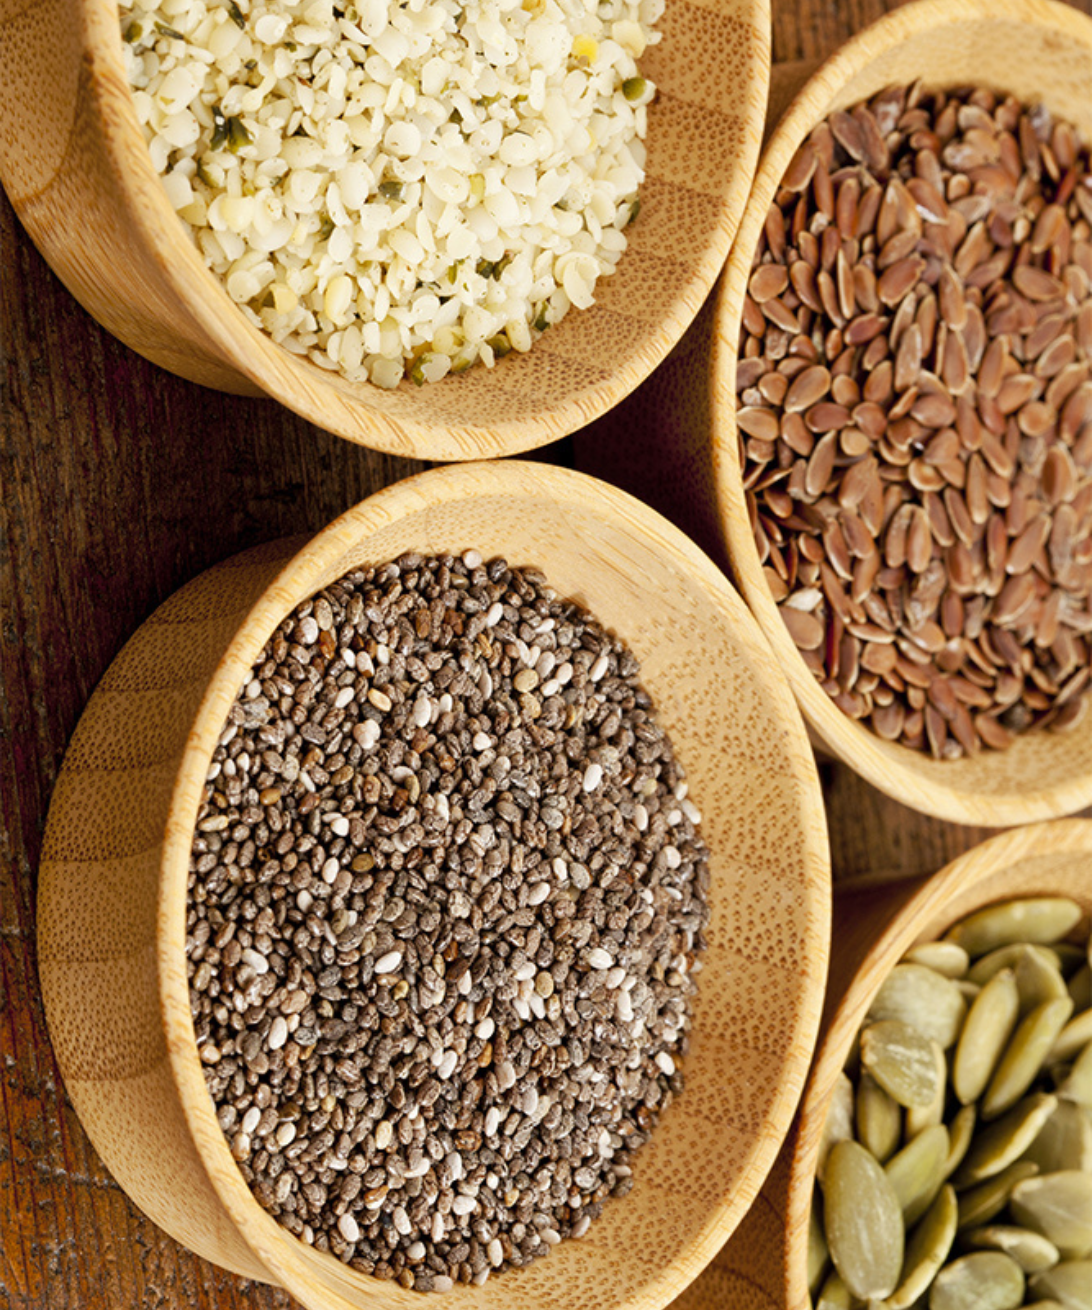 Best Grains & Seeds to Add to Your Diet